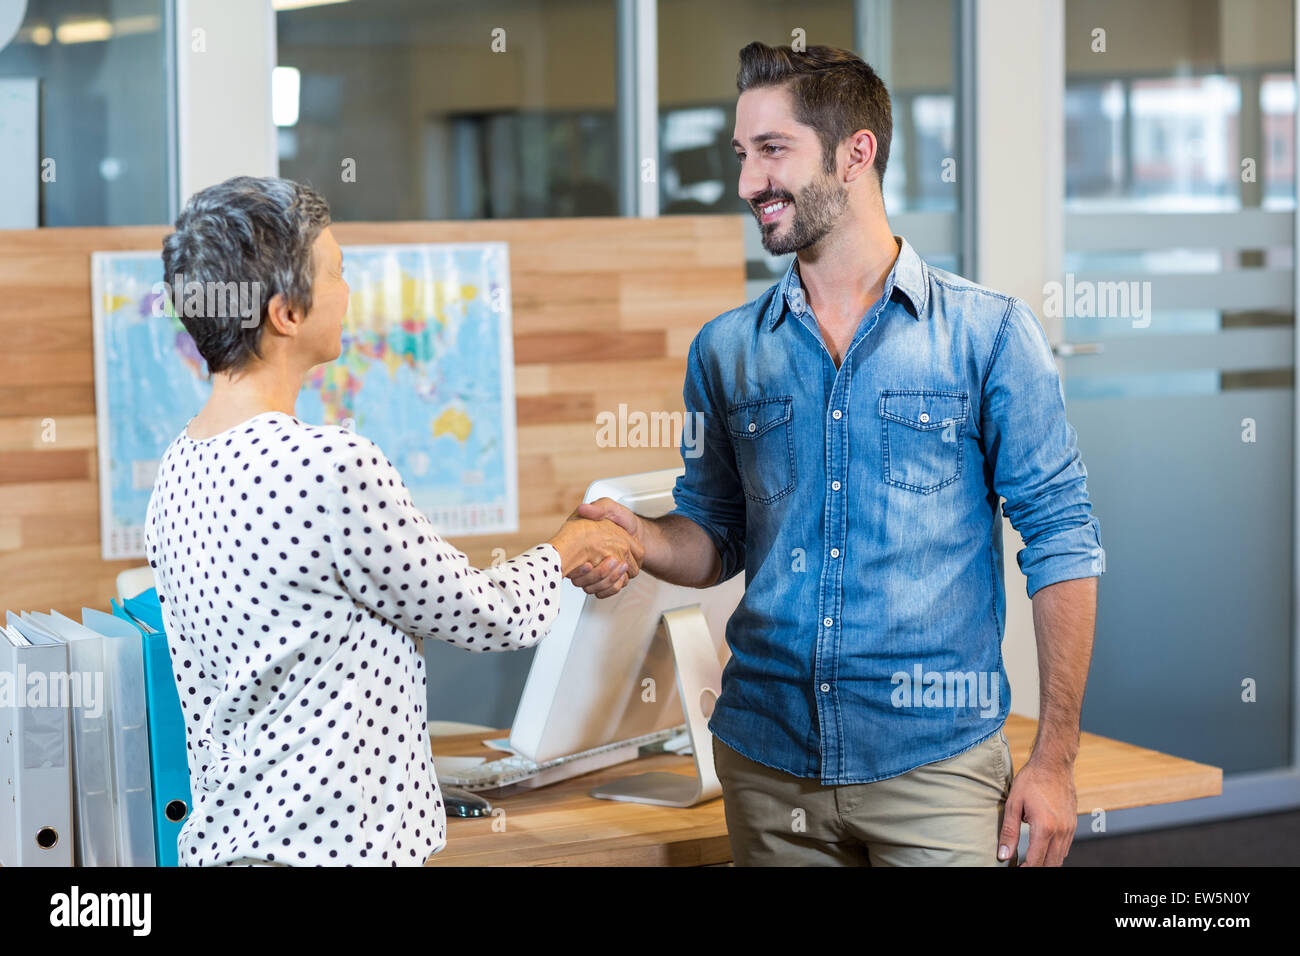 Smiling business people shaking hands Stock Photo